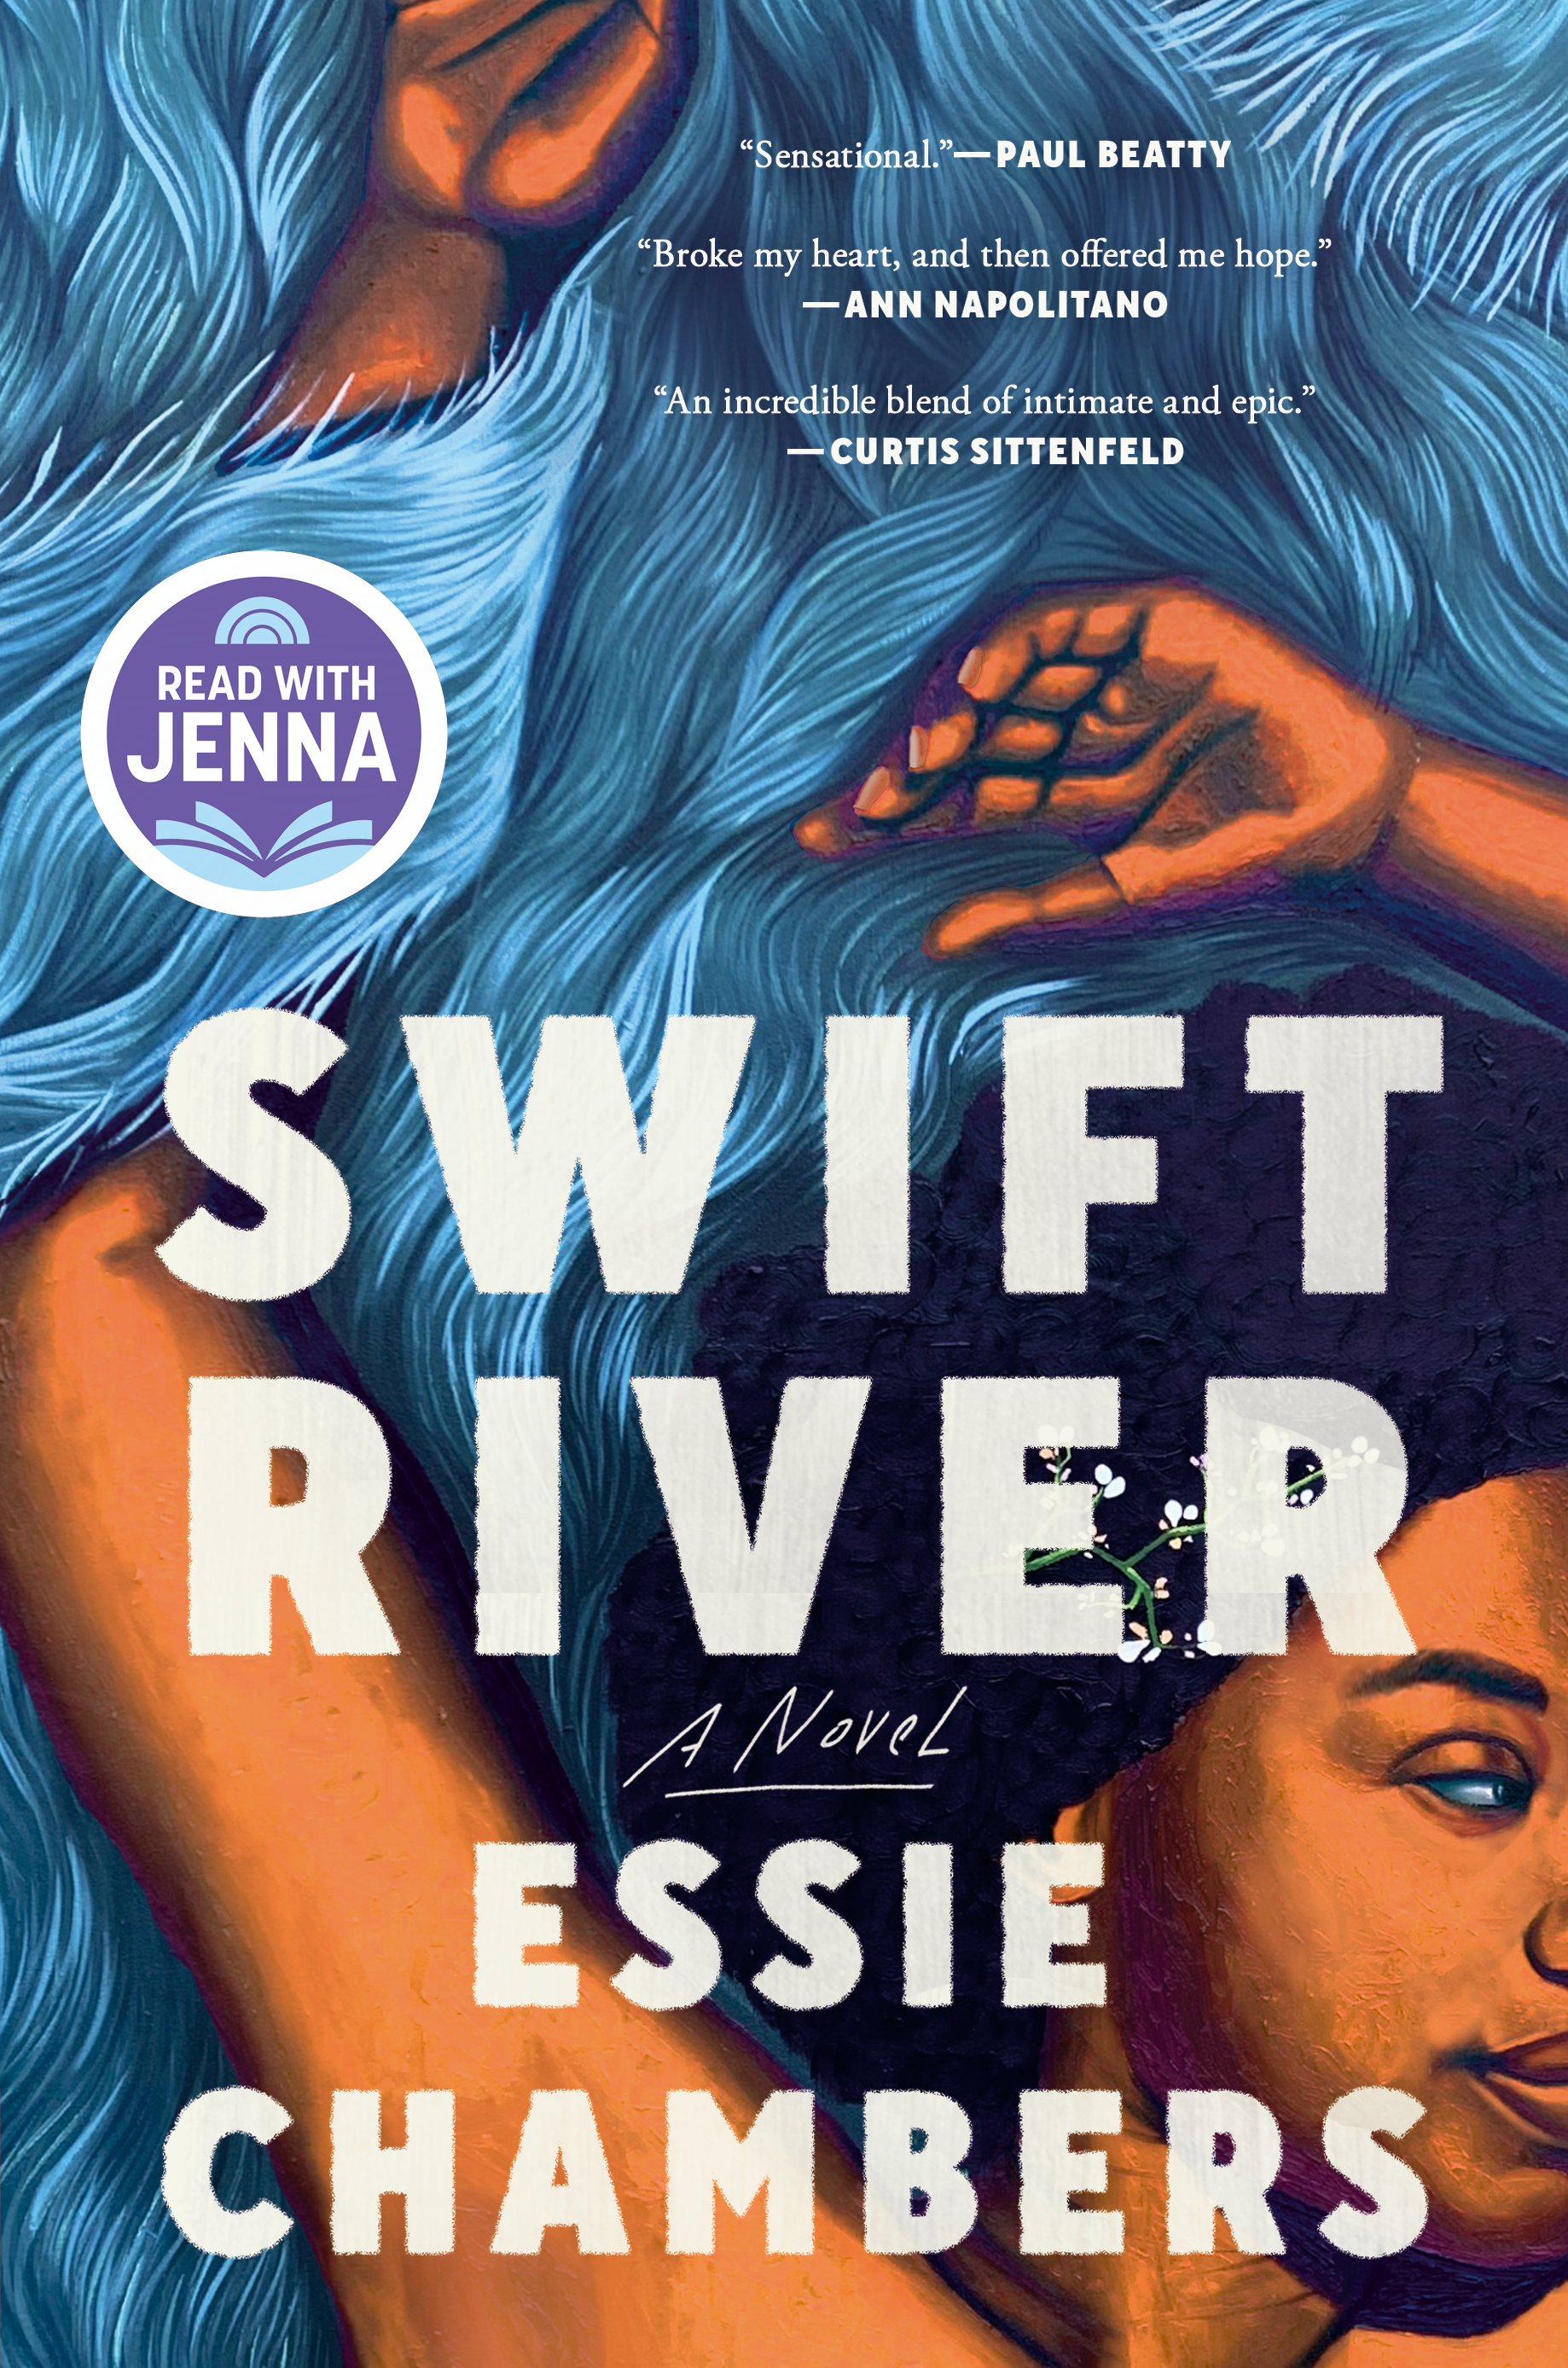 Image for "Swift River"